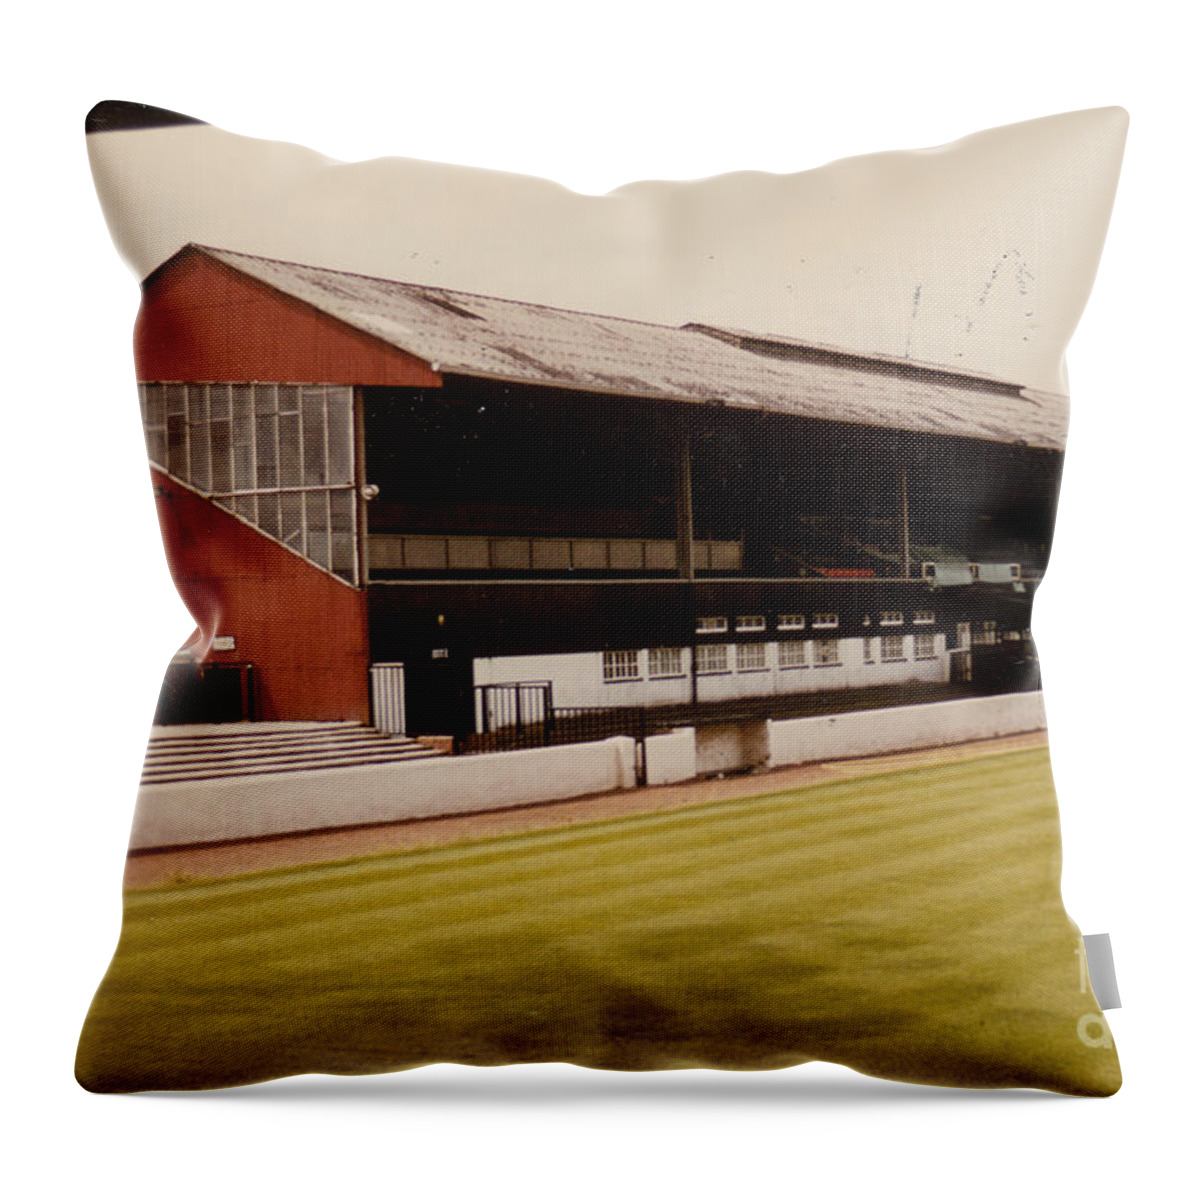  Throw Pillow featuring the photograph Ayr United - Somerset Park - Main Stand 1 - Leitch -June 1983 by Legendary Football Grounds